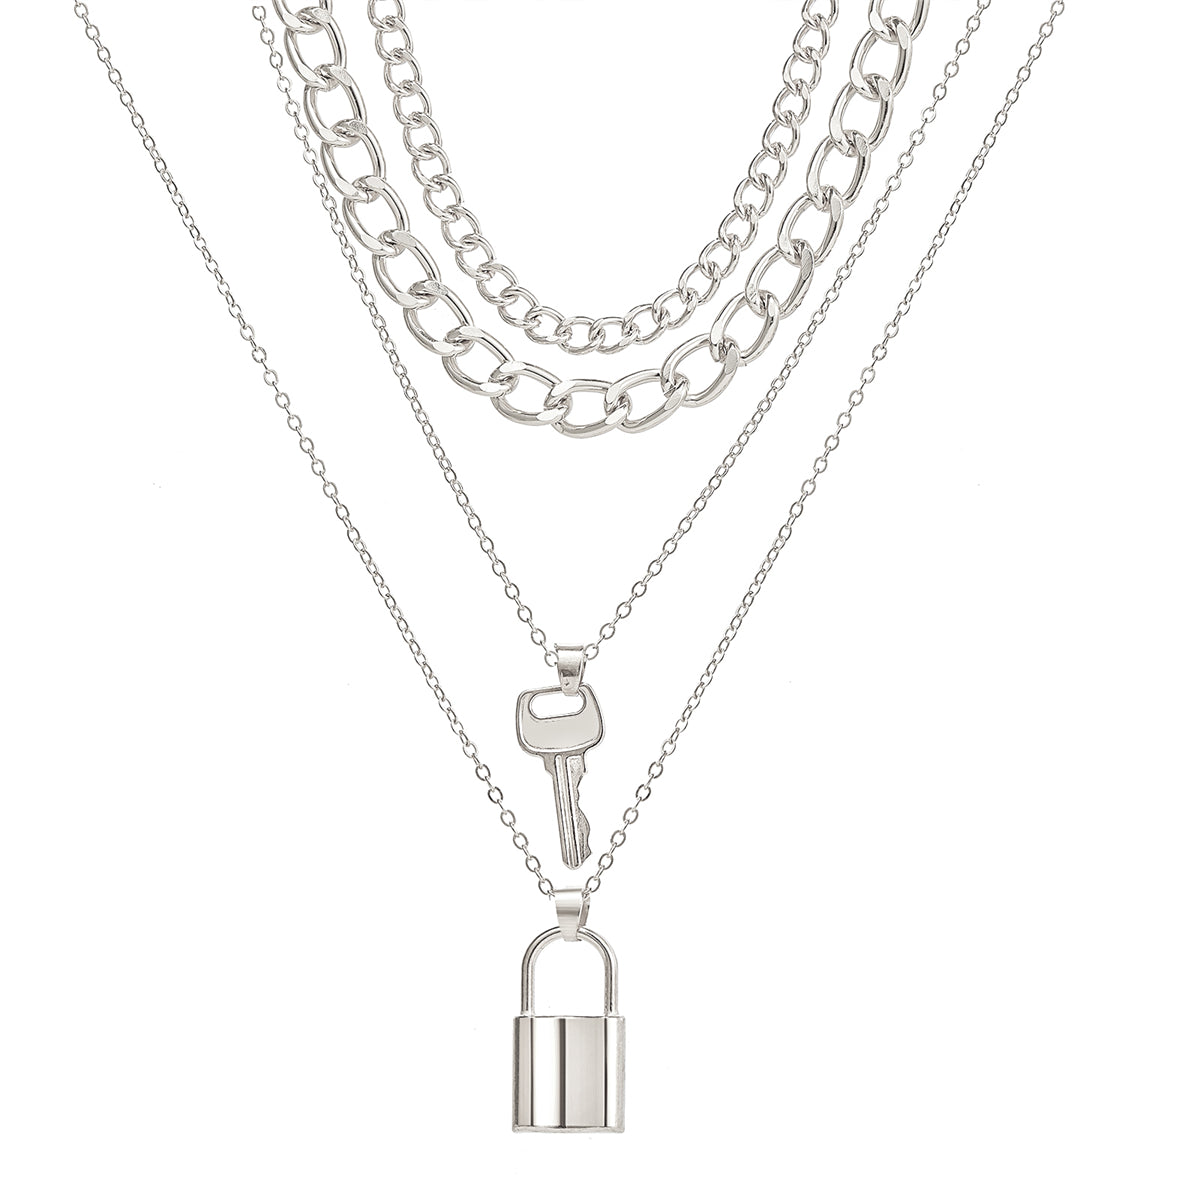 Silver-Plated Key Lock Layered Chain Pendant Necklace